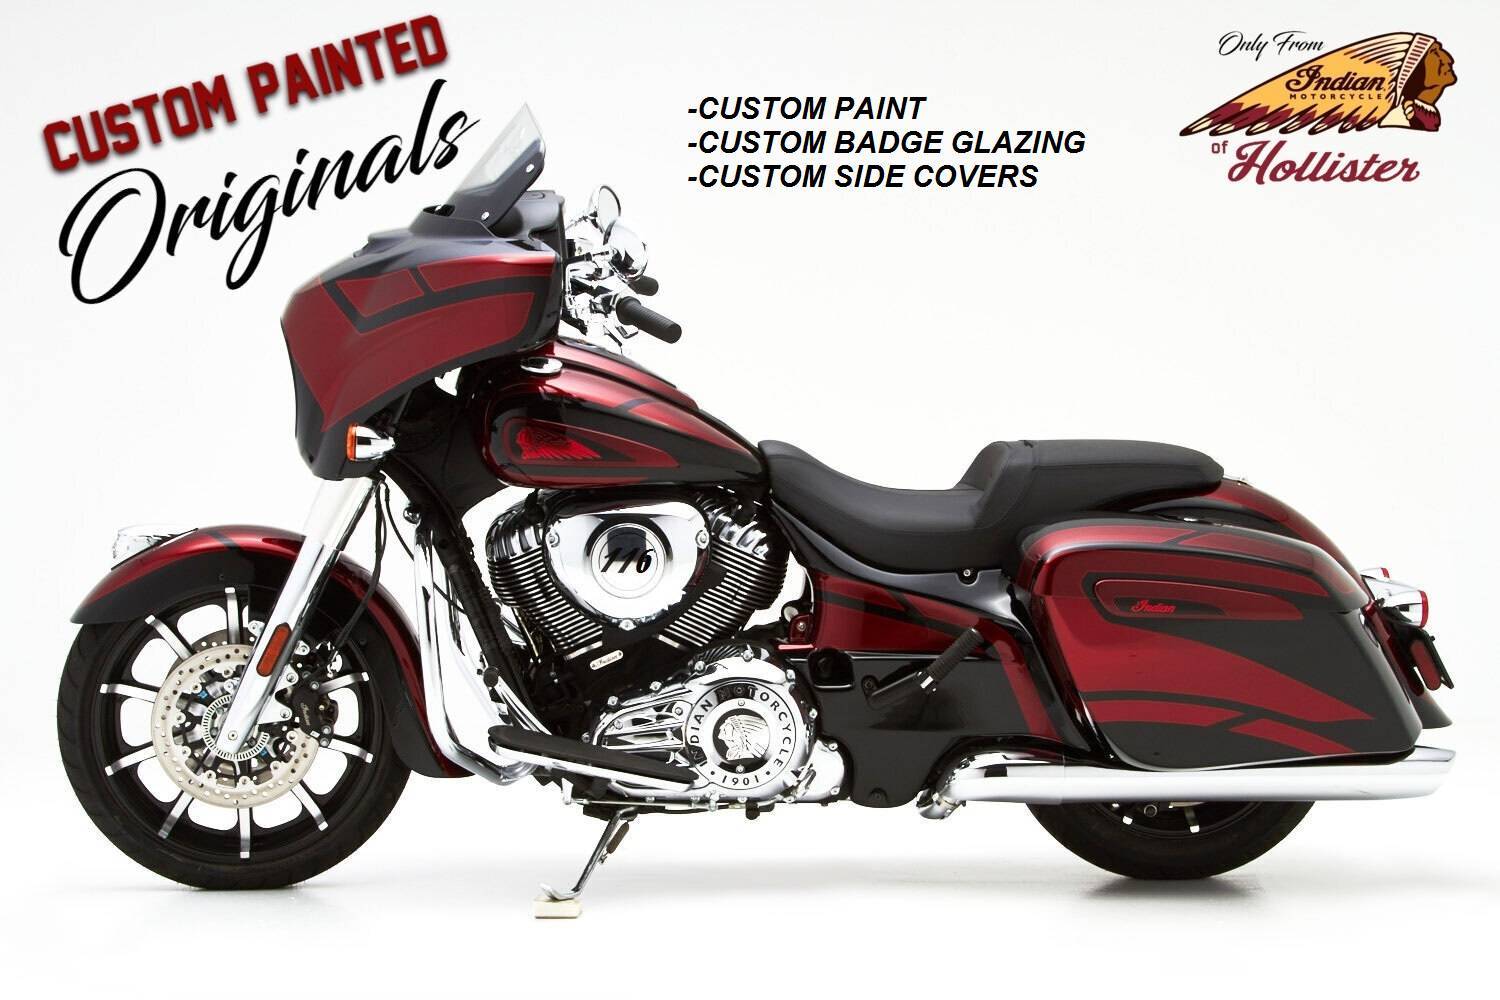 New 2021 Indian Chieftain Limited Motorcycles In Hollister Ca Custom Candy Red Black Pearl 411ctltd02